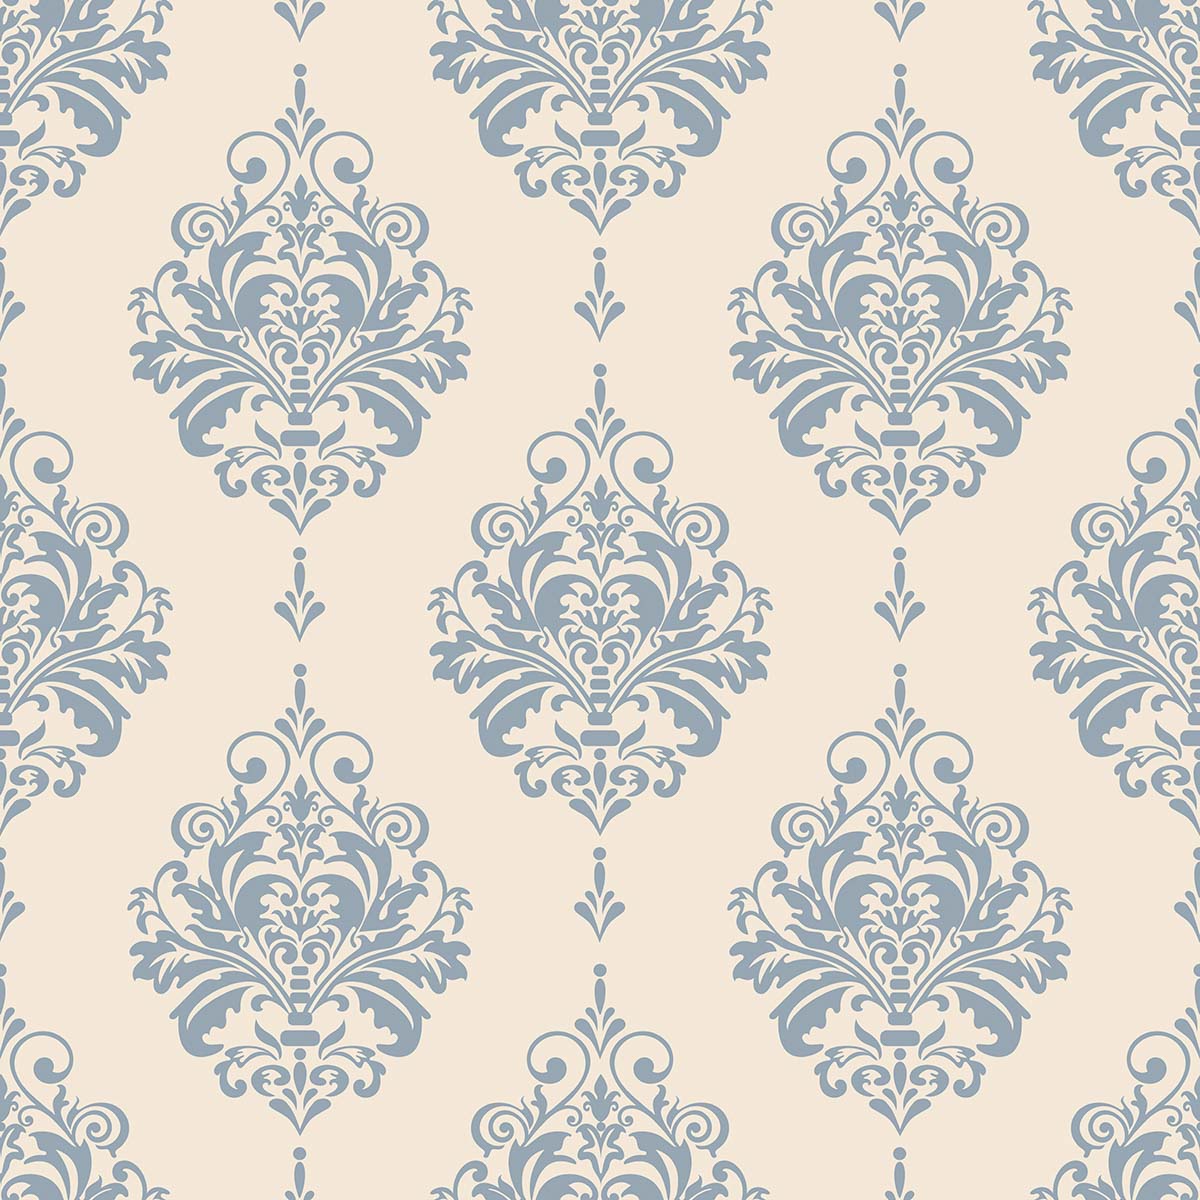 A wallpaper with blue and white pattern